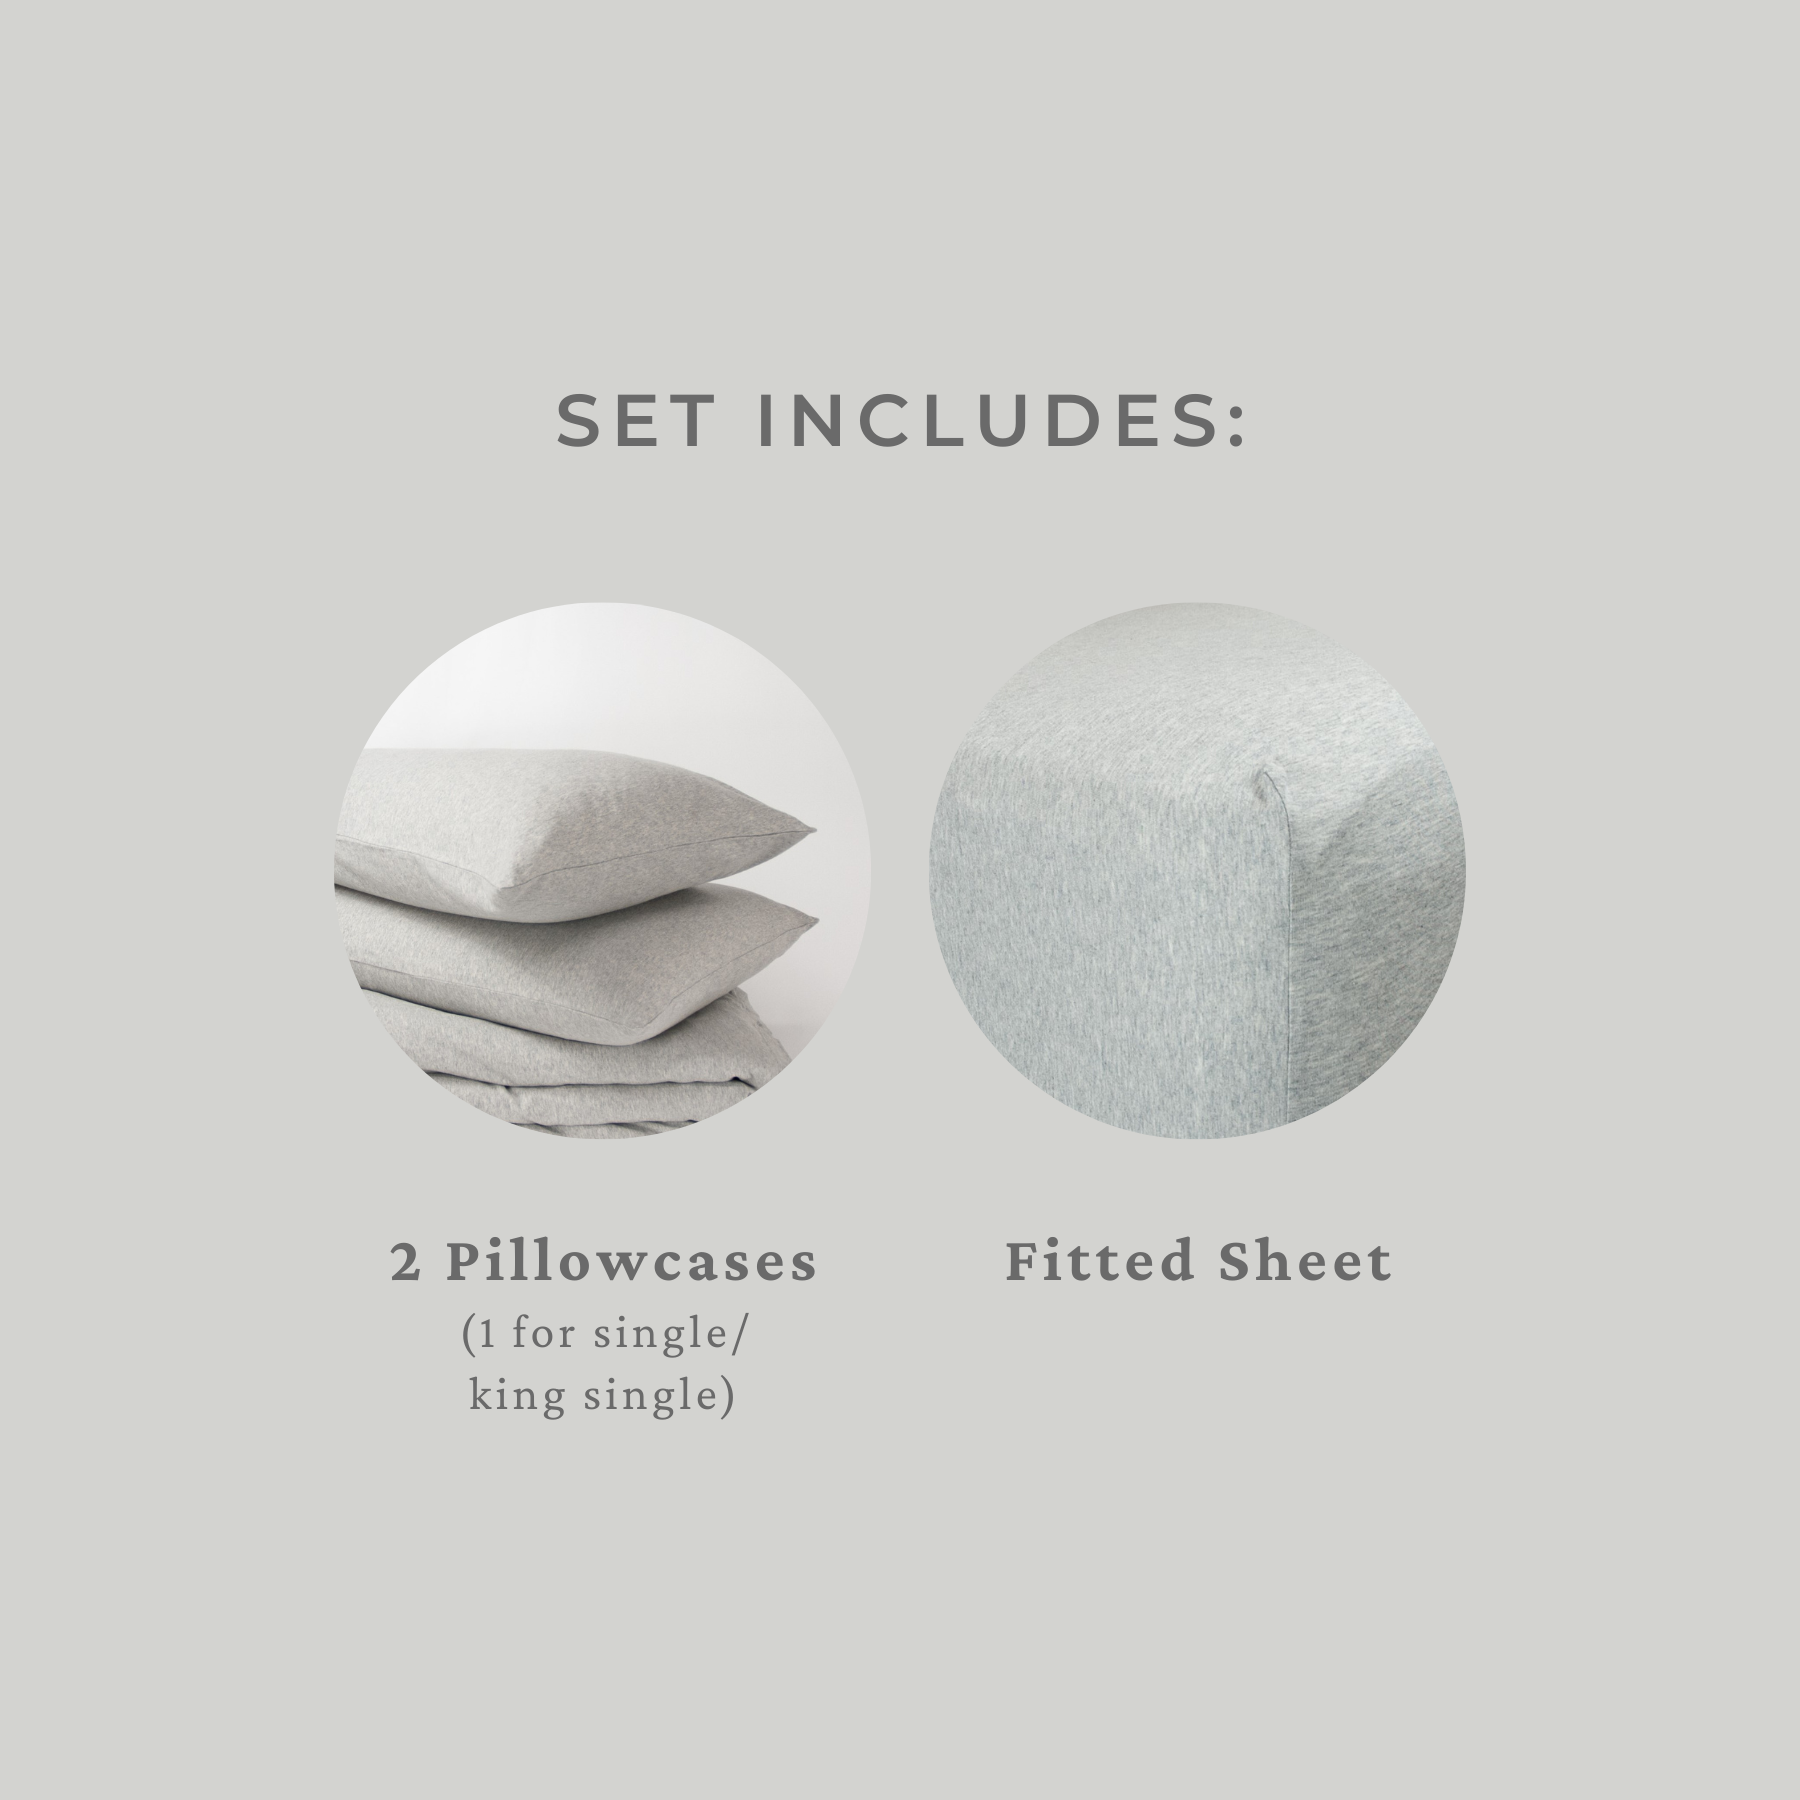 Set includes: fitted sheet and two pillowcases (one for single or king single)